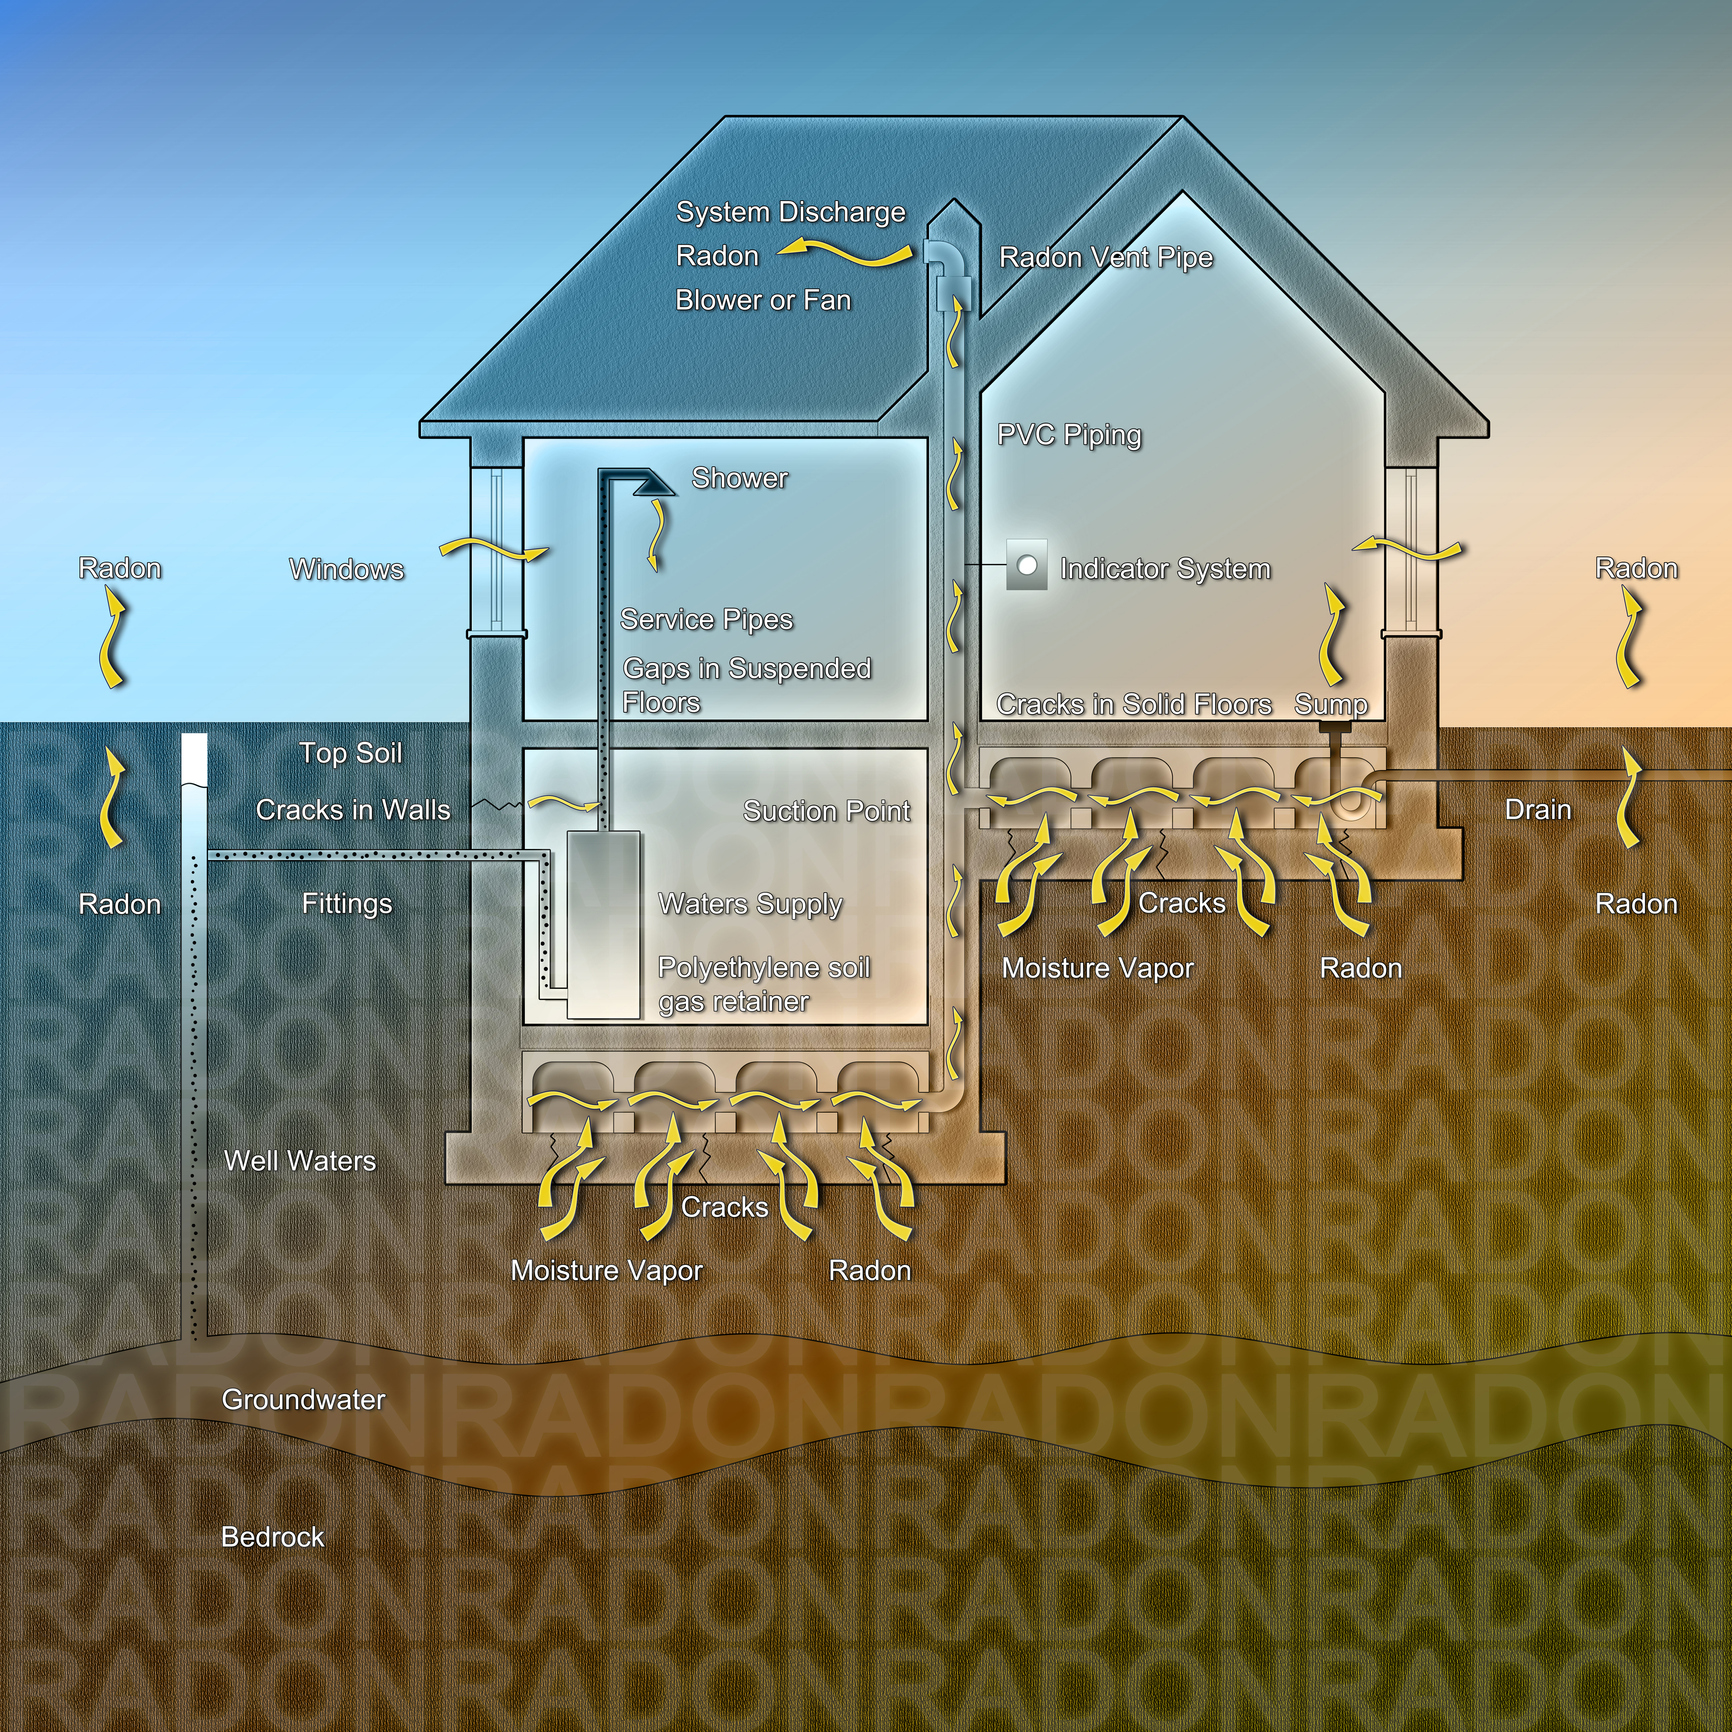 The danger of radon gas in our homes - How to create a crawl space to evacuate the radon gas - concept illustration